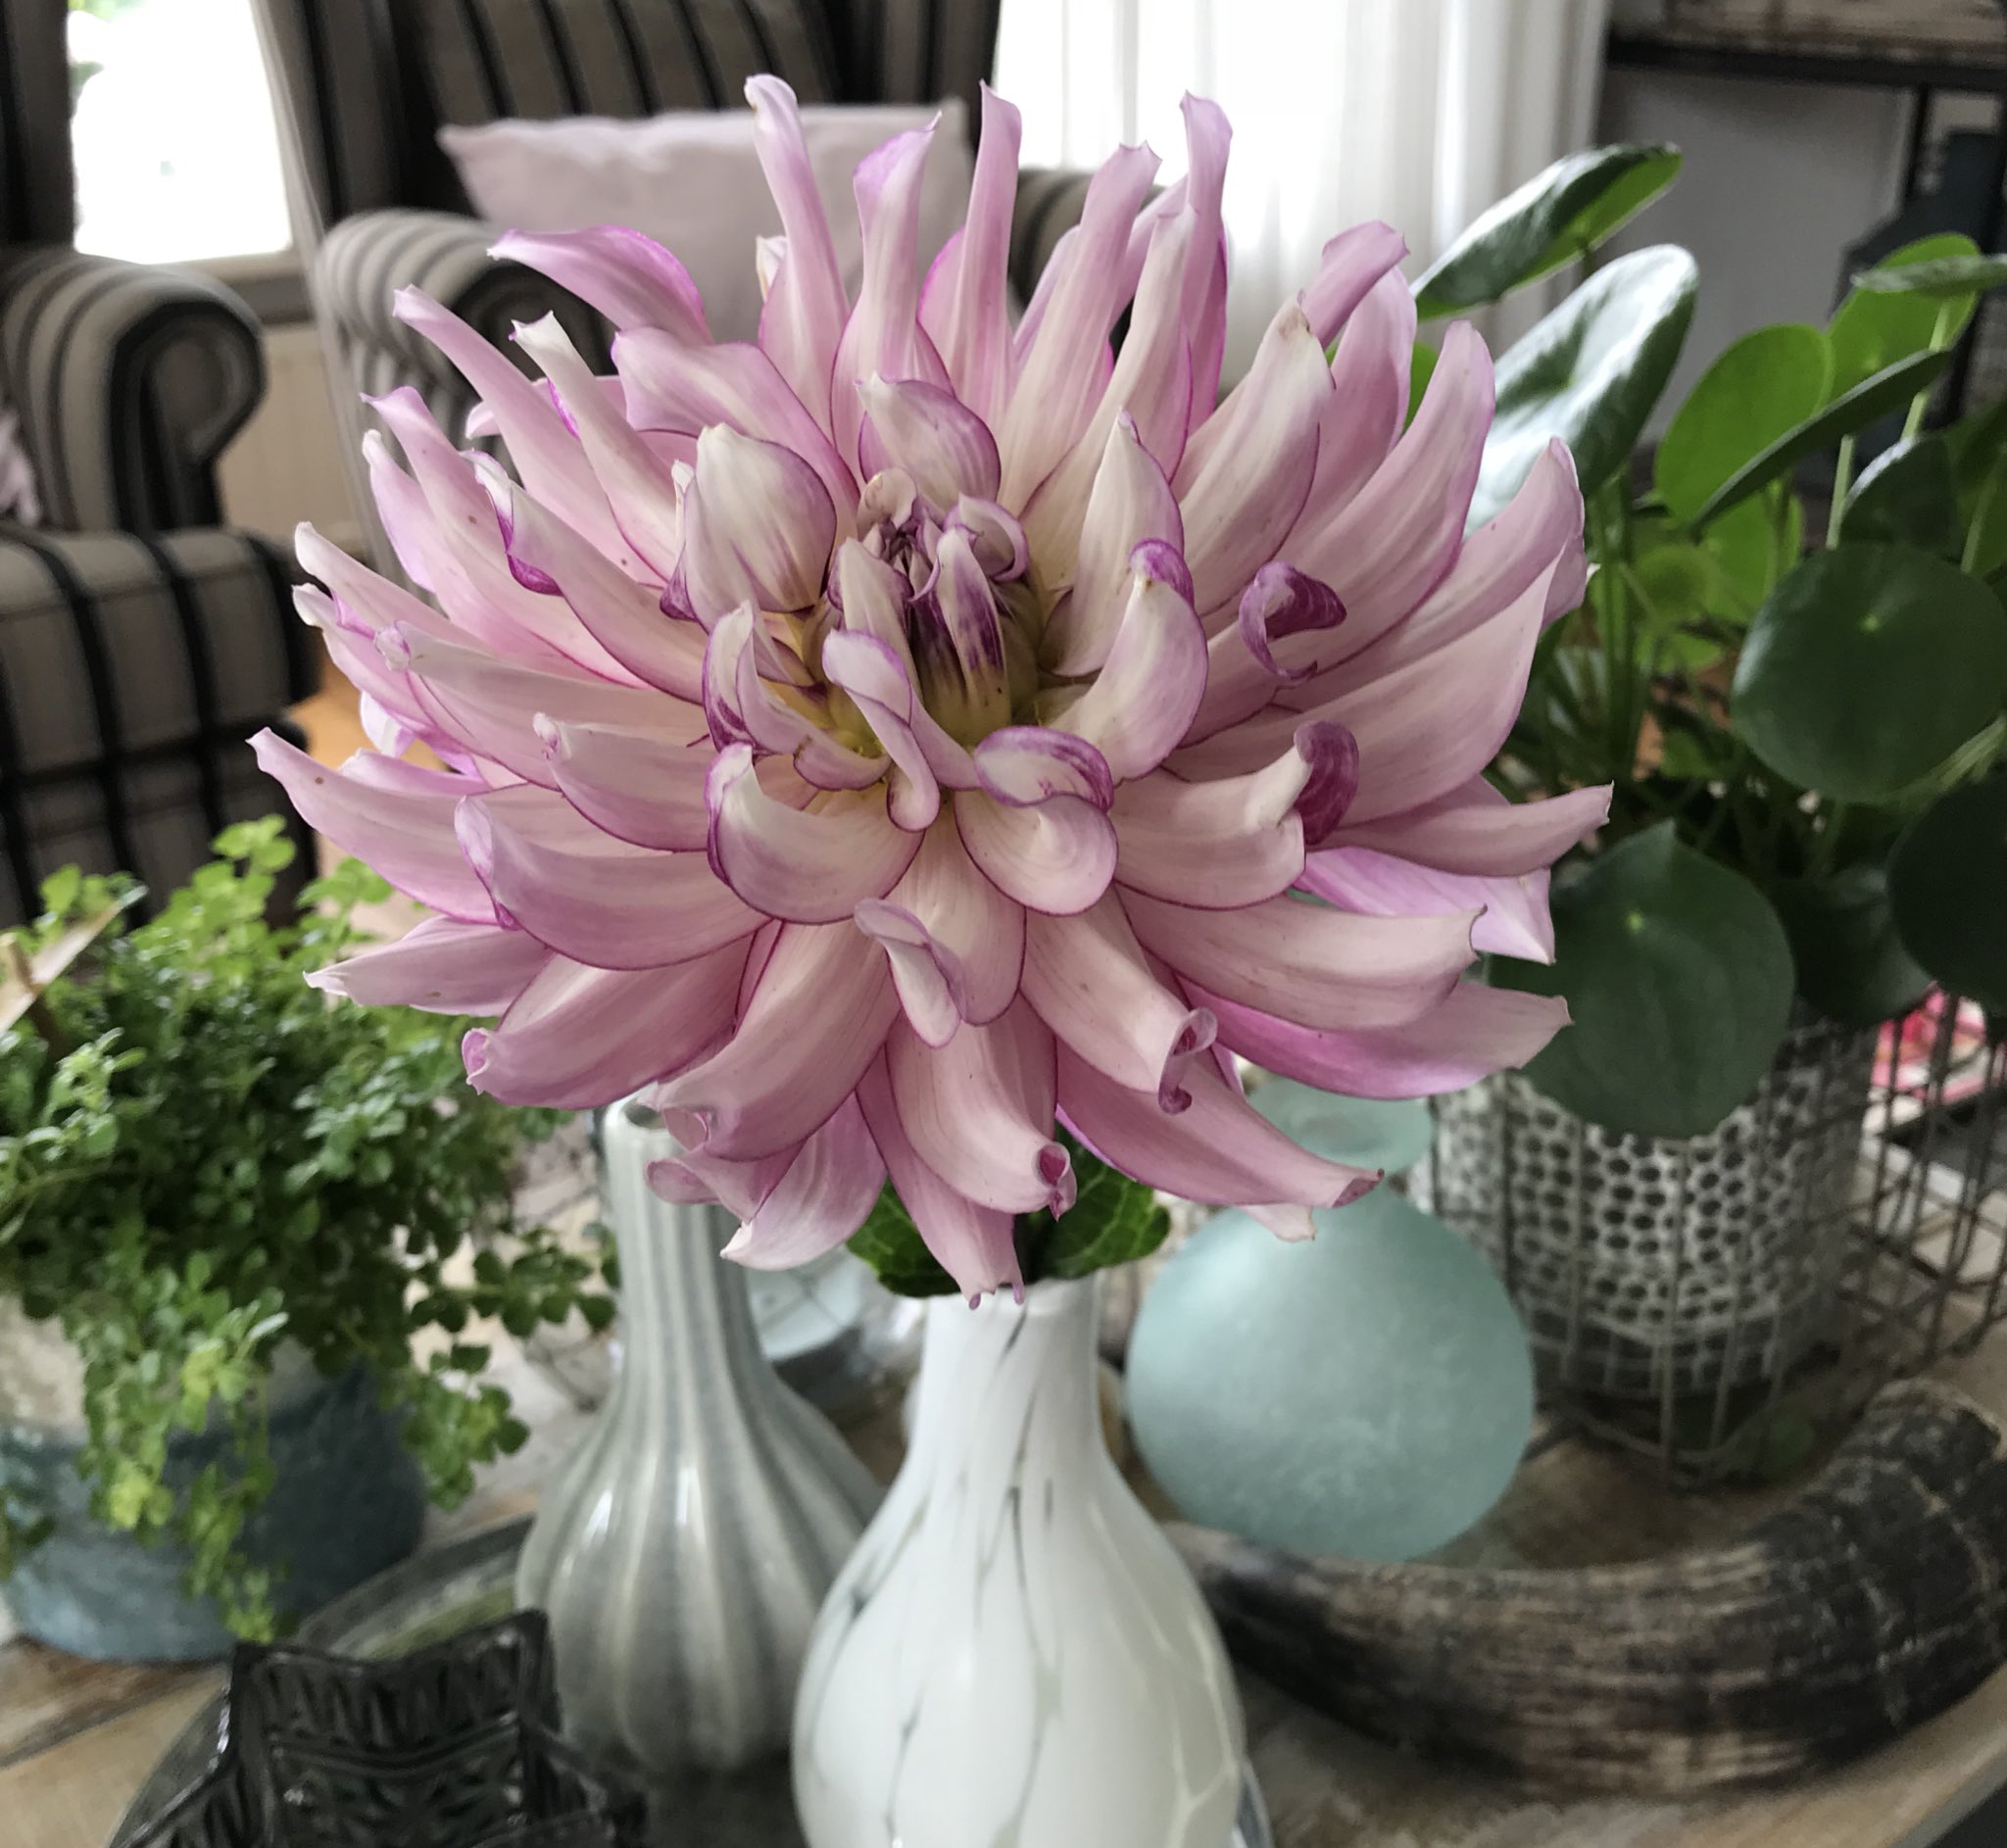 Linda vd Slot - FAM Flower Farm on X: My favorite, dahlia Leila Savanna  Rose, picked from my own garden. The more flowers you cut from the plant,  the more buds will